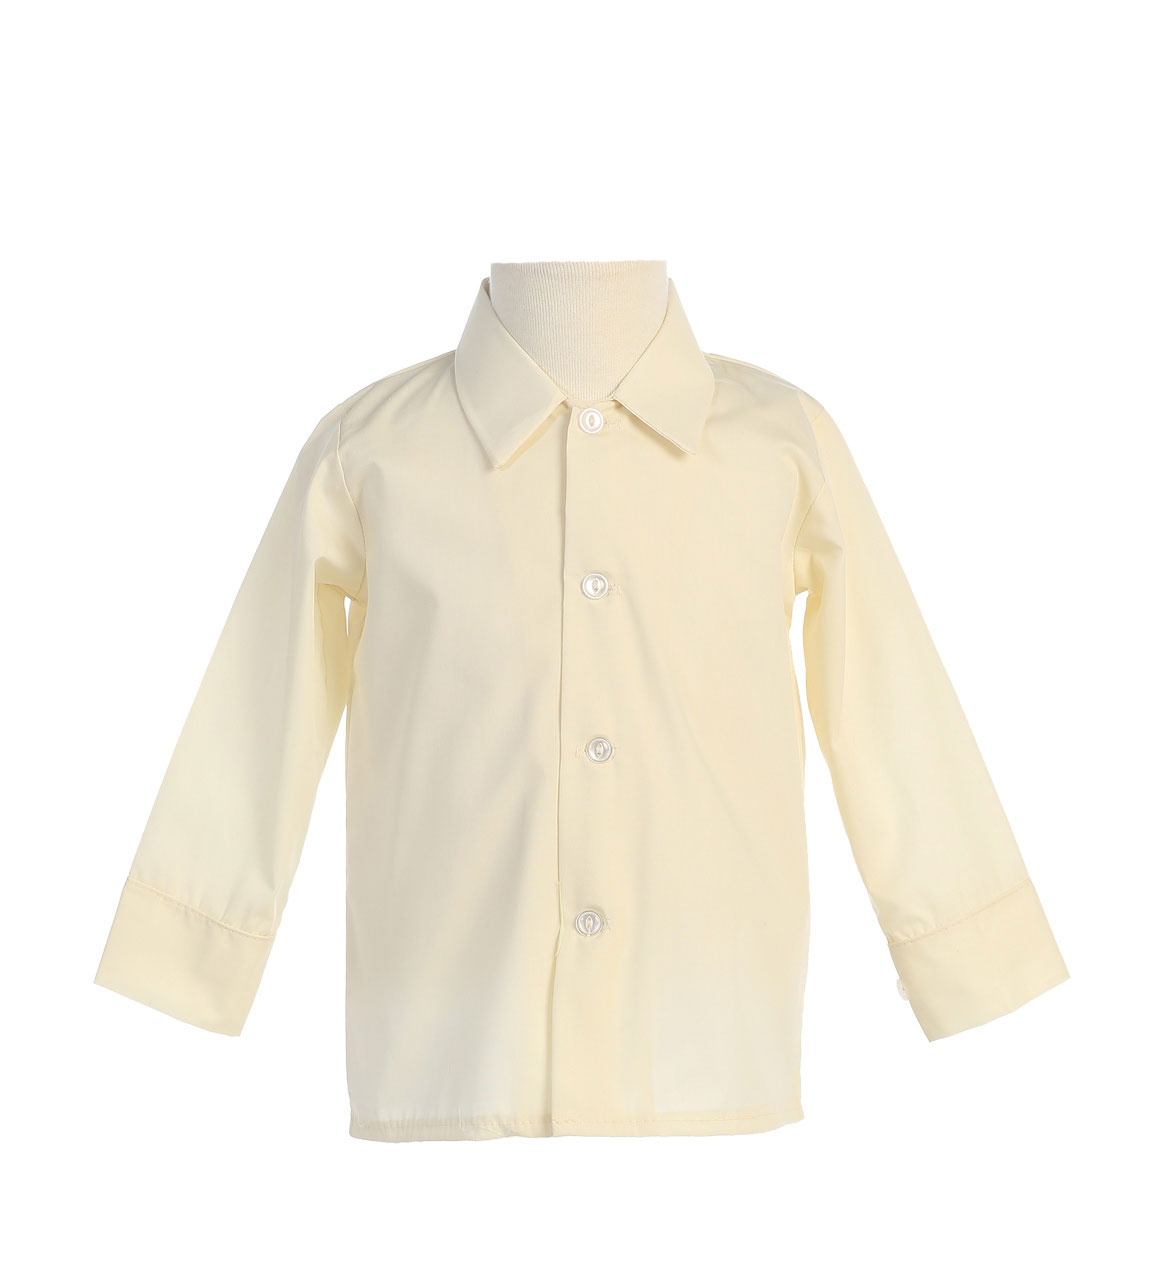 Boys Long Sleeved Simple Dress Shirt - Available in Ivory 2T